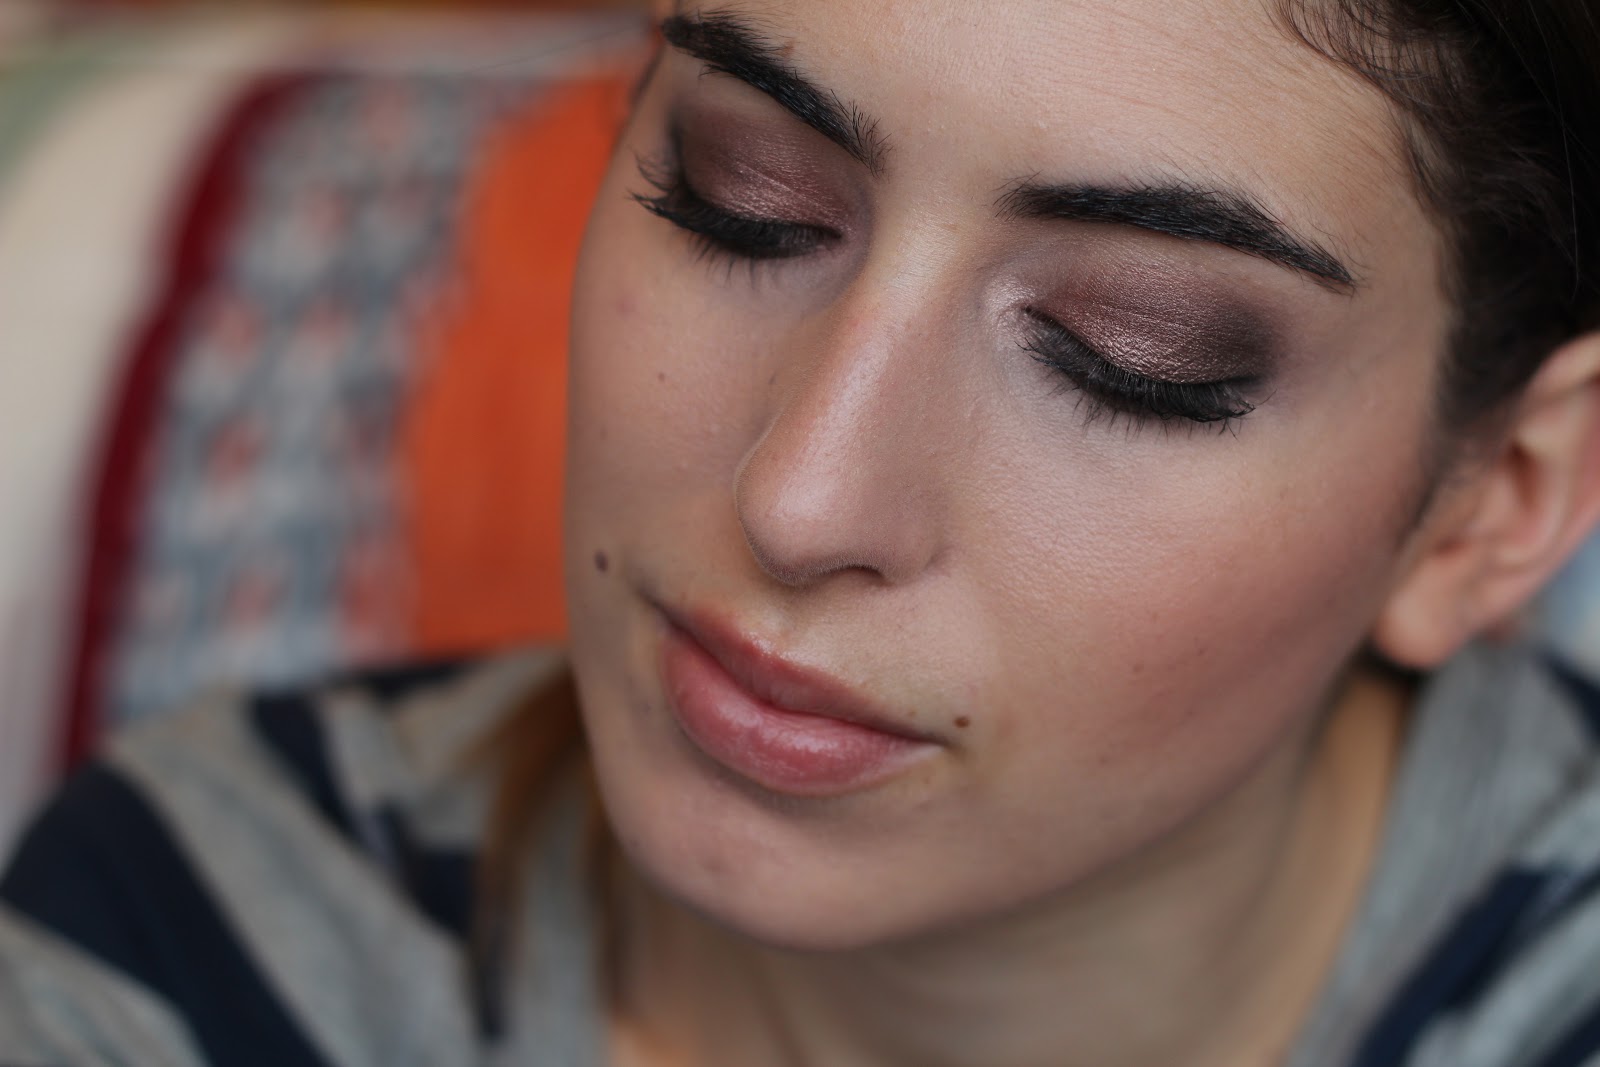 URBAN DECAY NAKED HEAT PALETTE - Lily Pebbles